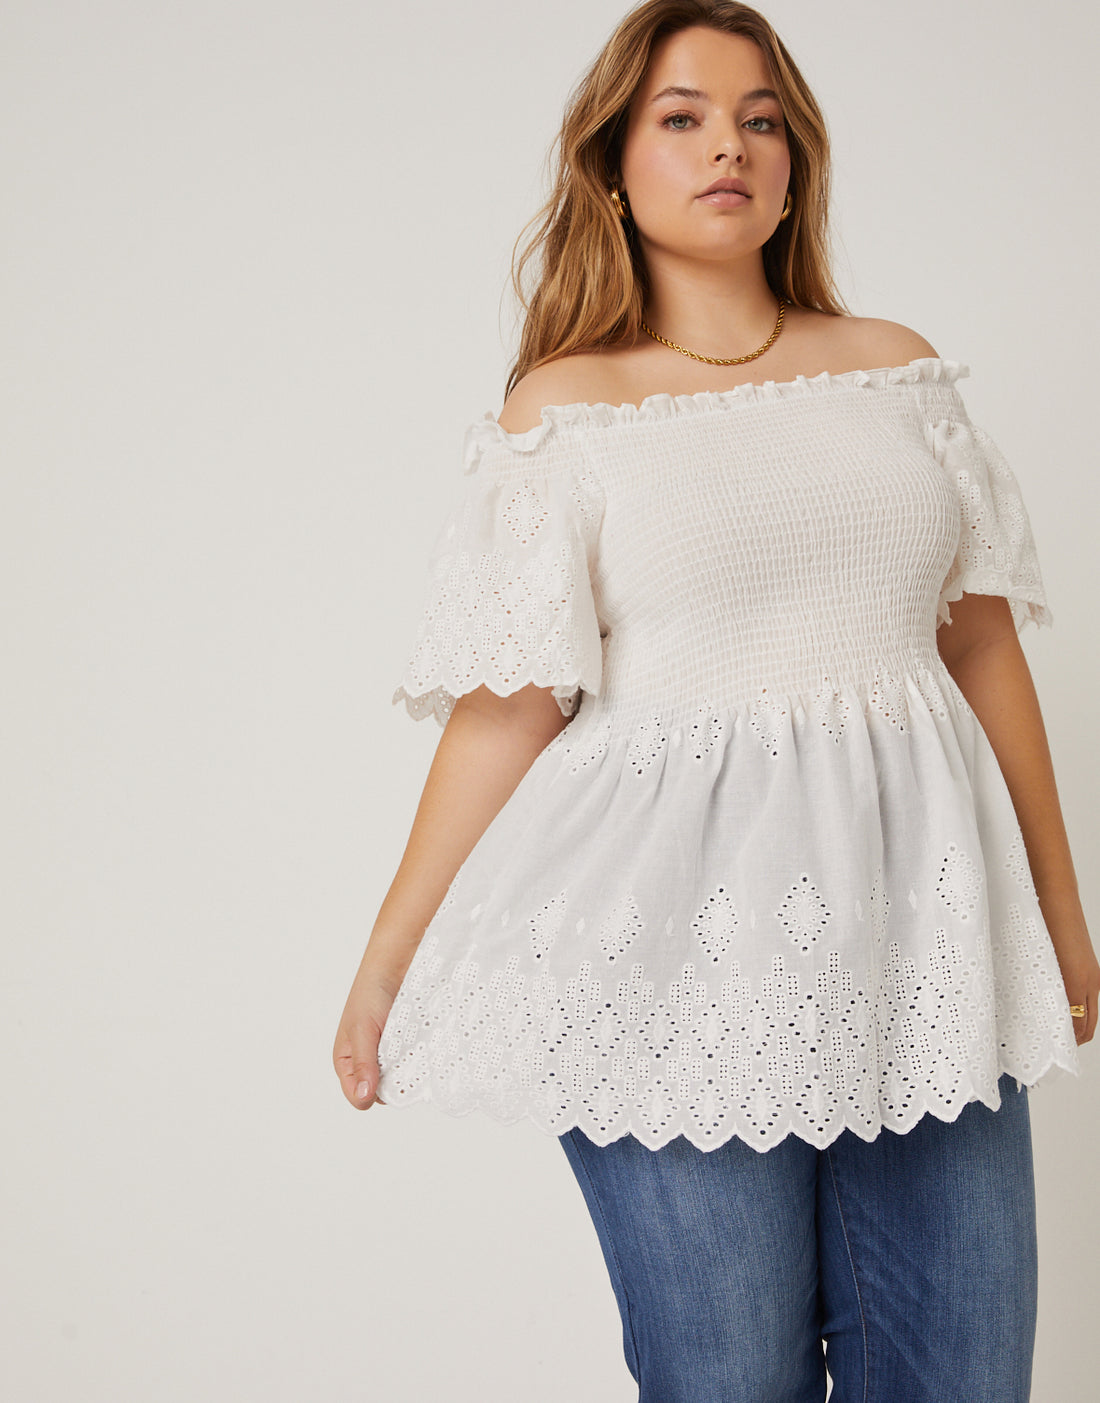 Curve Smocked Eyelet Lace Top Plus Size Tops White 1XL -2020AVE